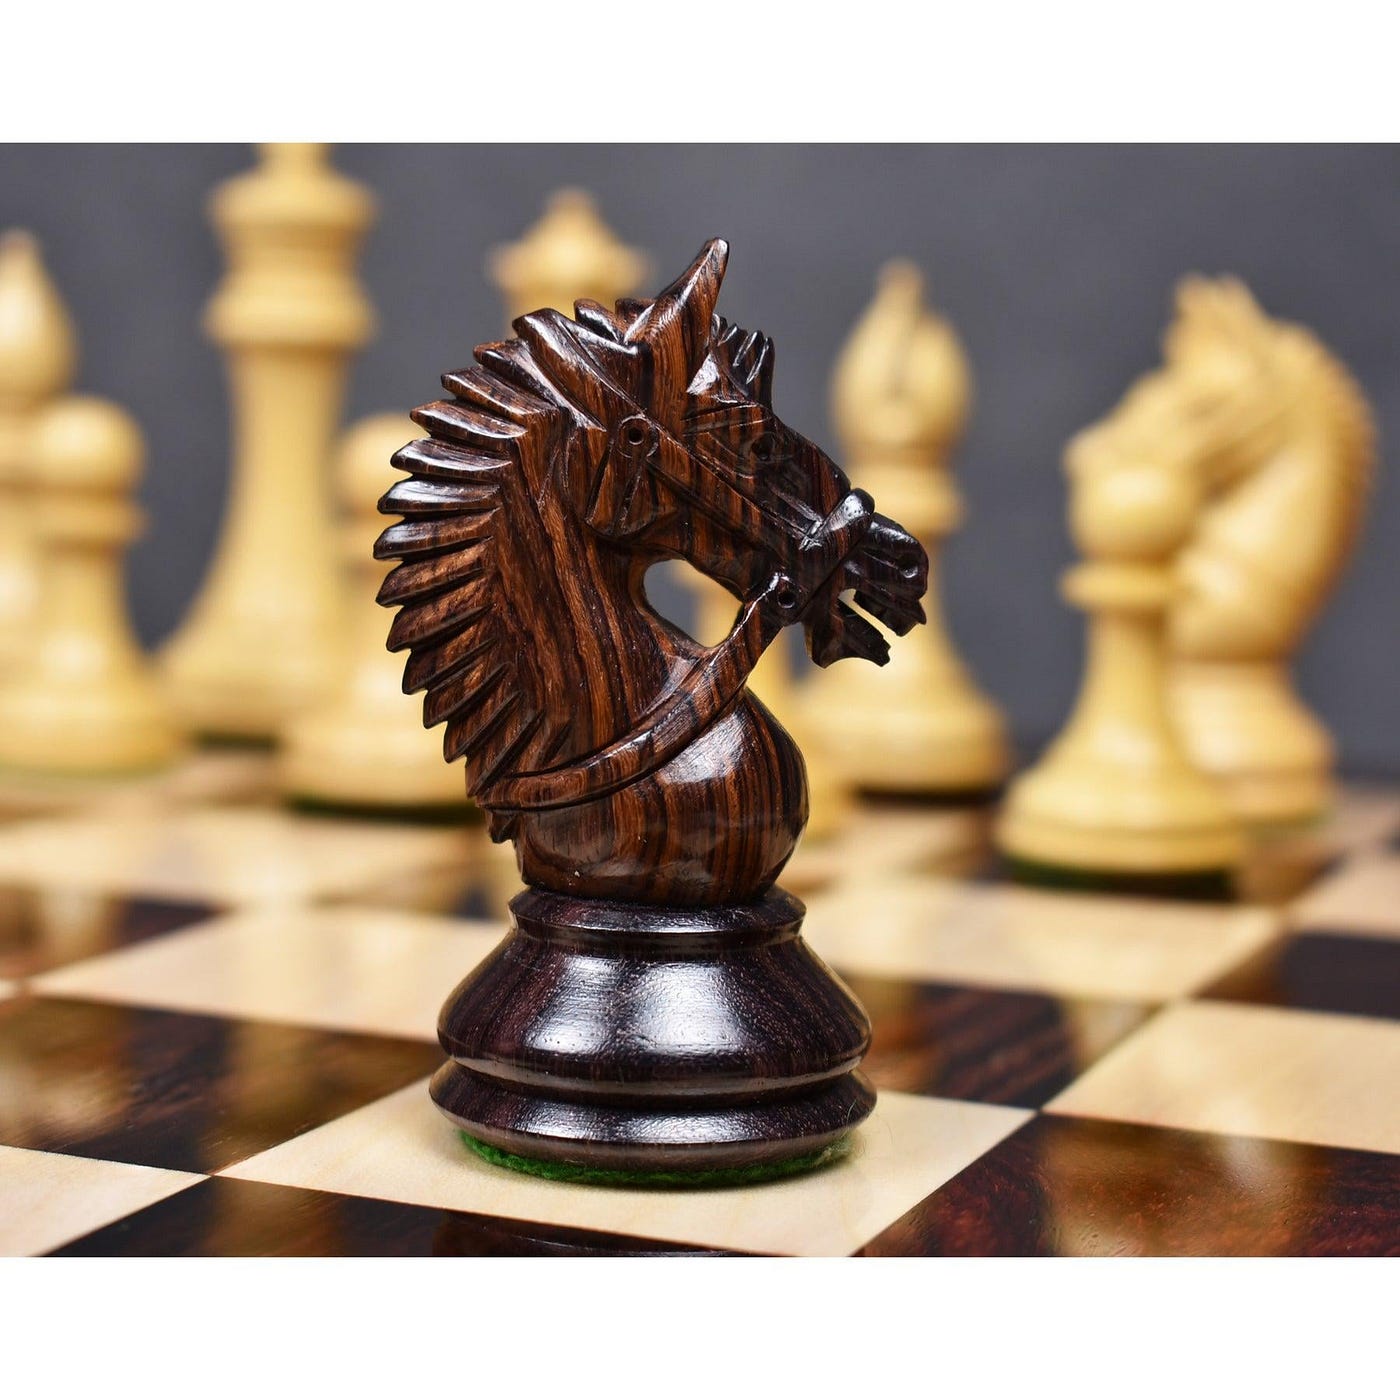 Luxury Chess Pieces, Royal Chess Mall, by Royal Chess Mall